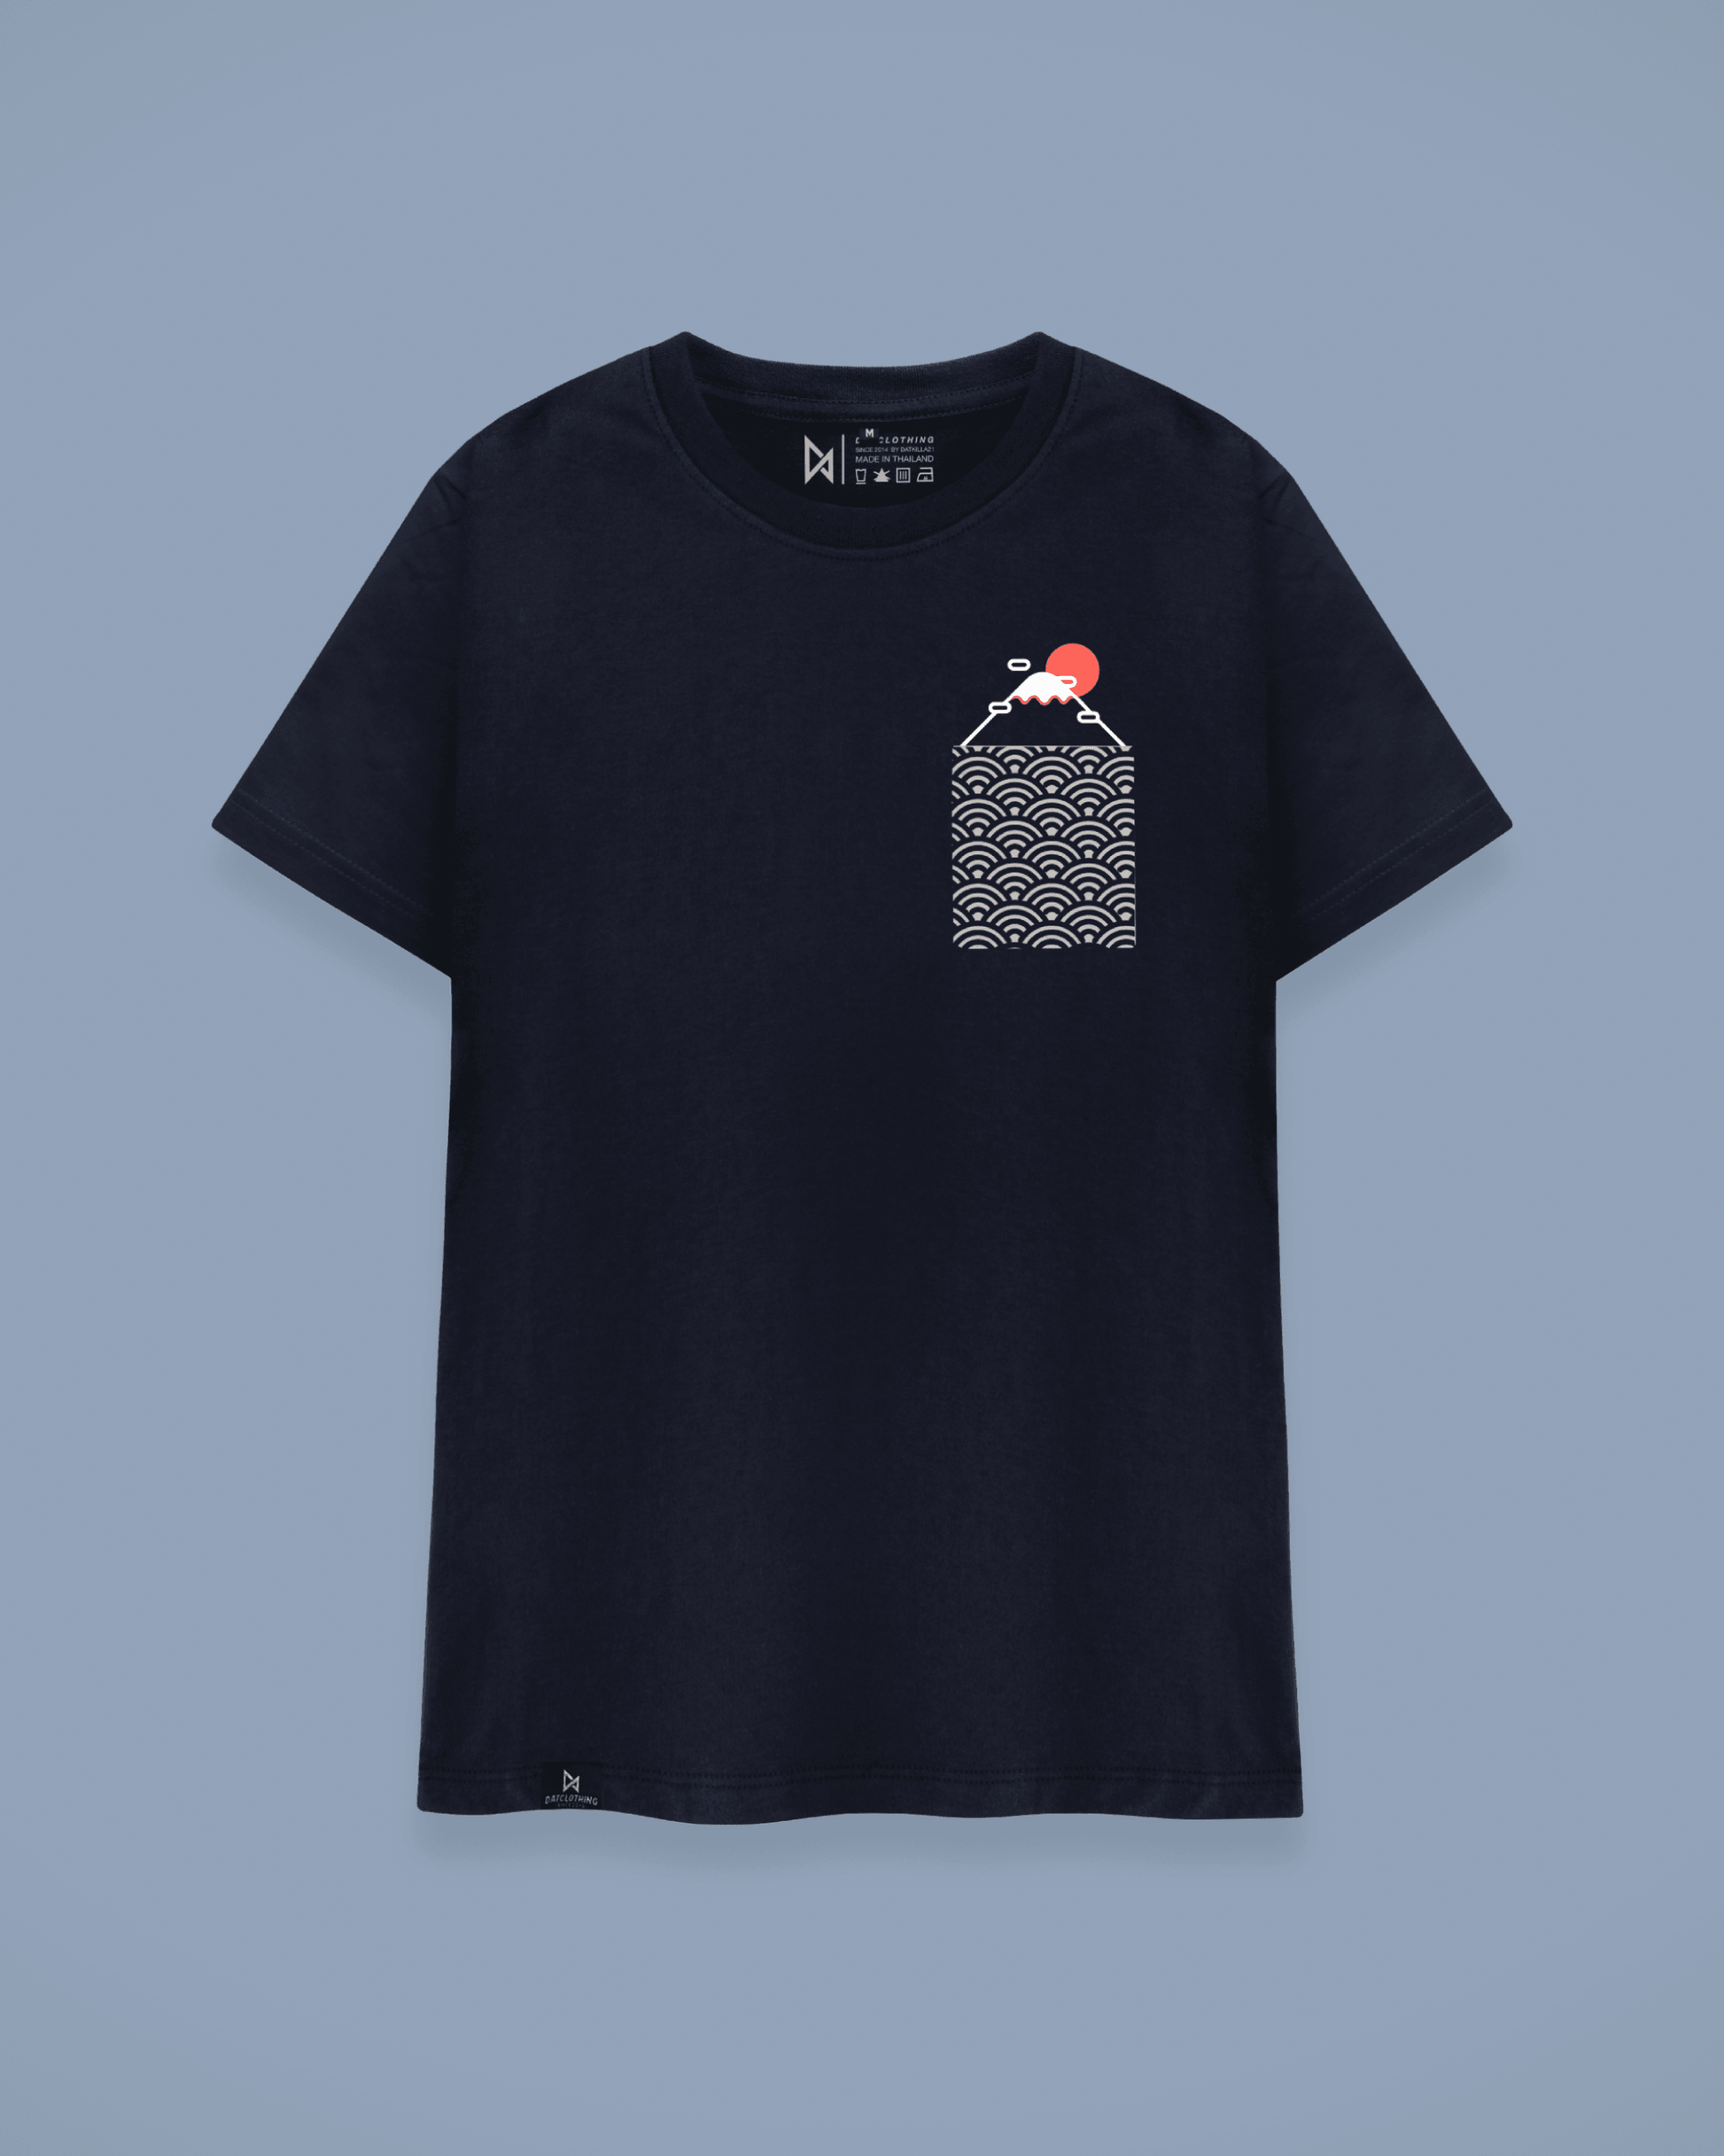 Datclothing - Navy Blue T-Shirt with Mount Fuji Print and White Waves Pocket